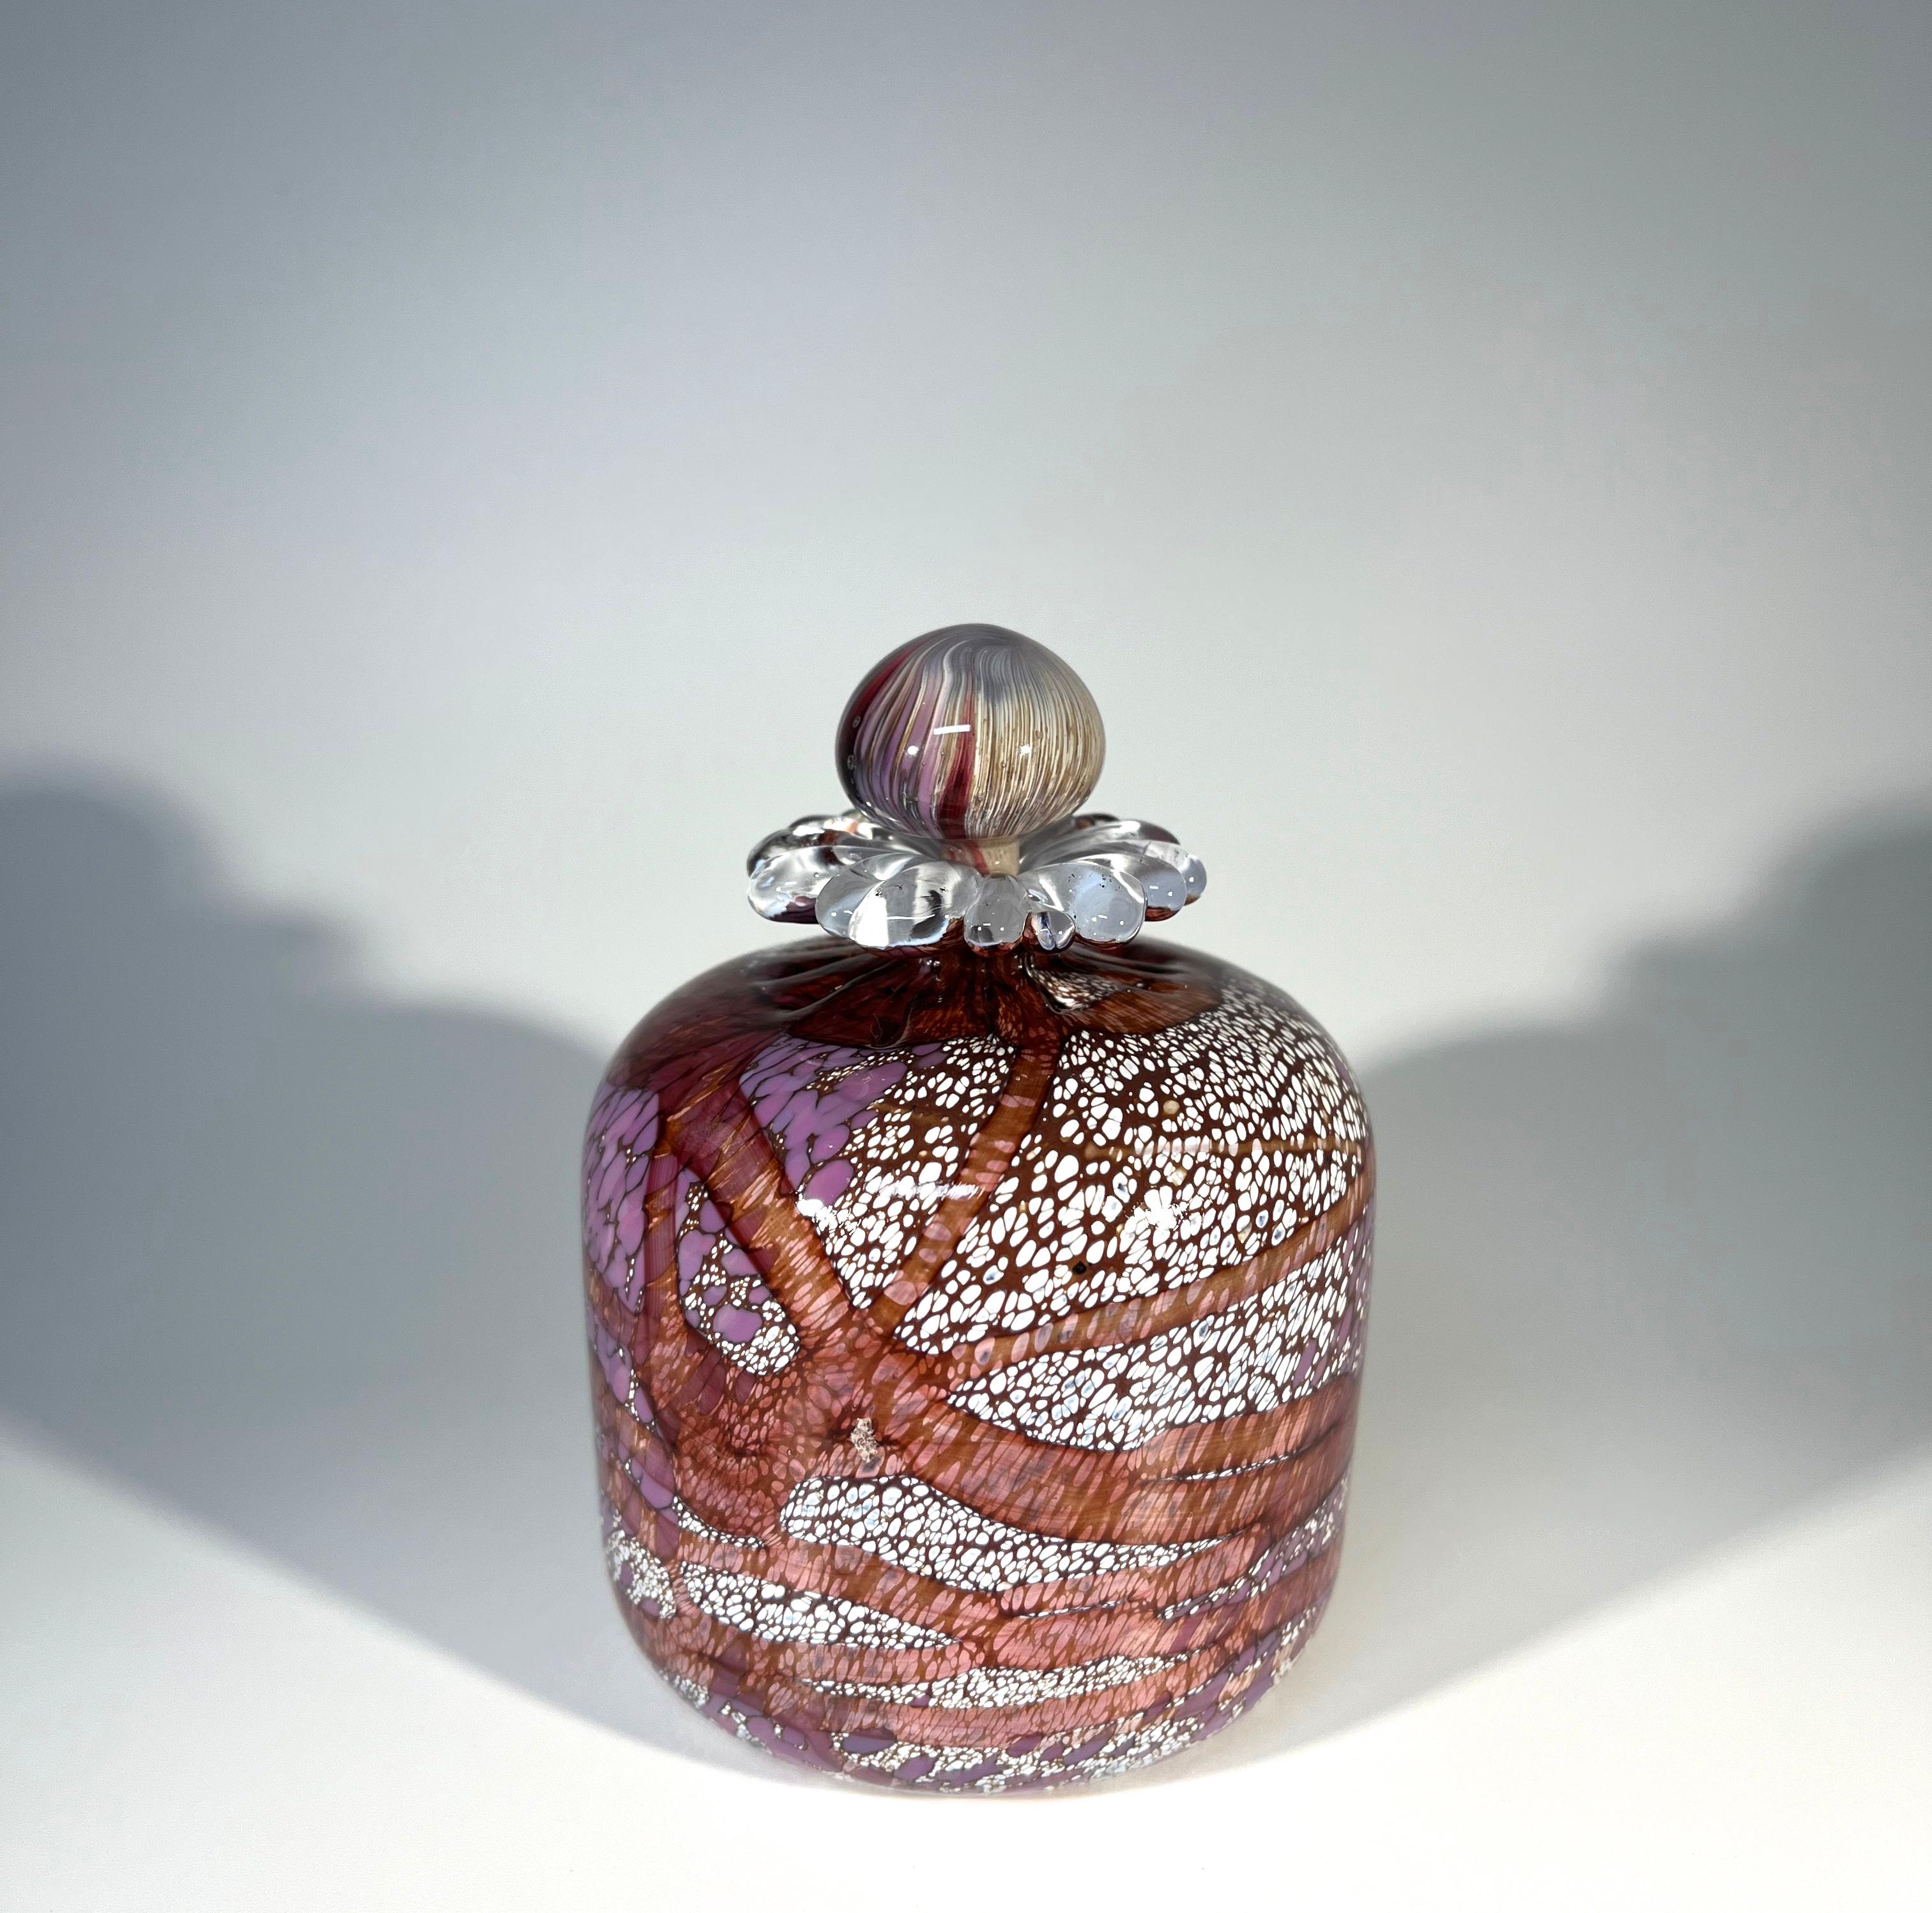 Desirable perfume bottle, hand blown by Guernsey Island Glass Studios in the Channel Islands
Created using a glass palette of fragrant lilac, plum and white blossom with daisy petal collar
The stopper is a swirl of complimenting hues
Pontil on base